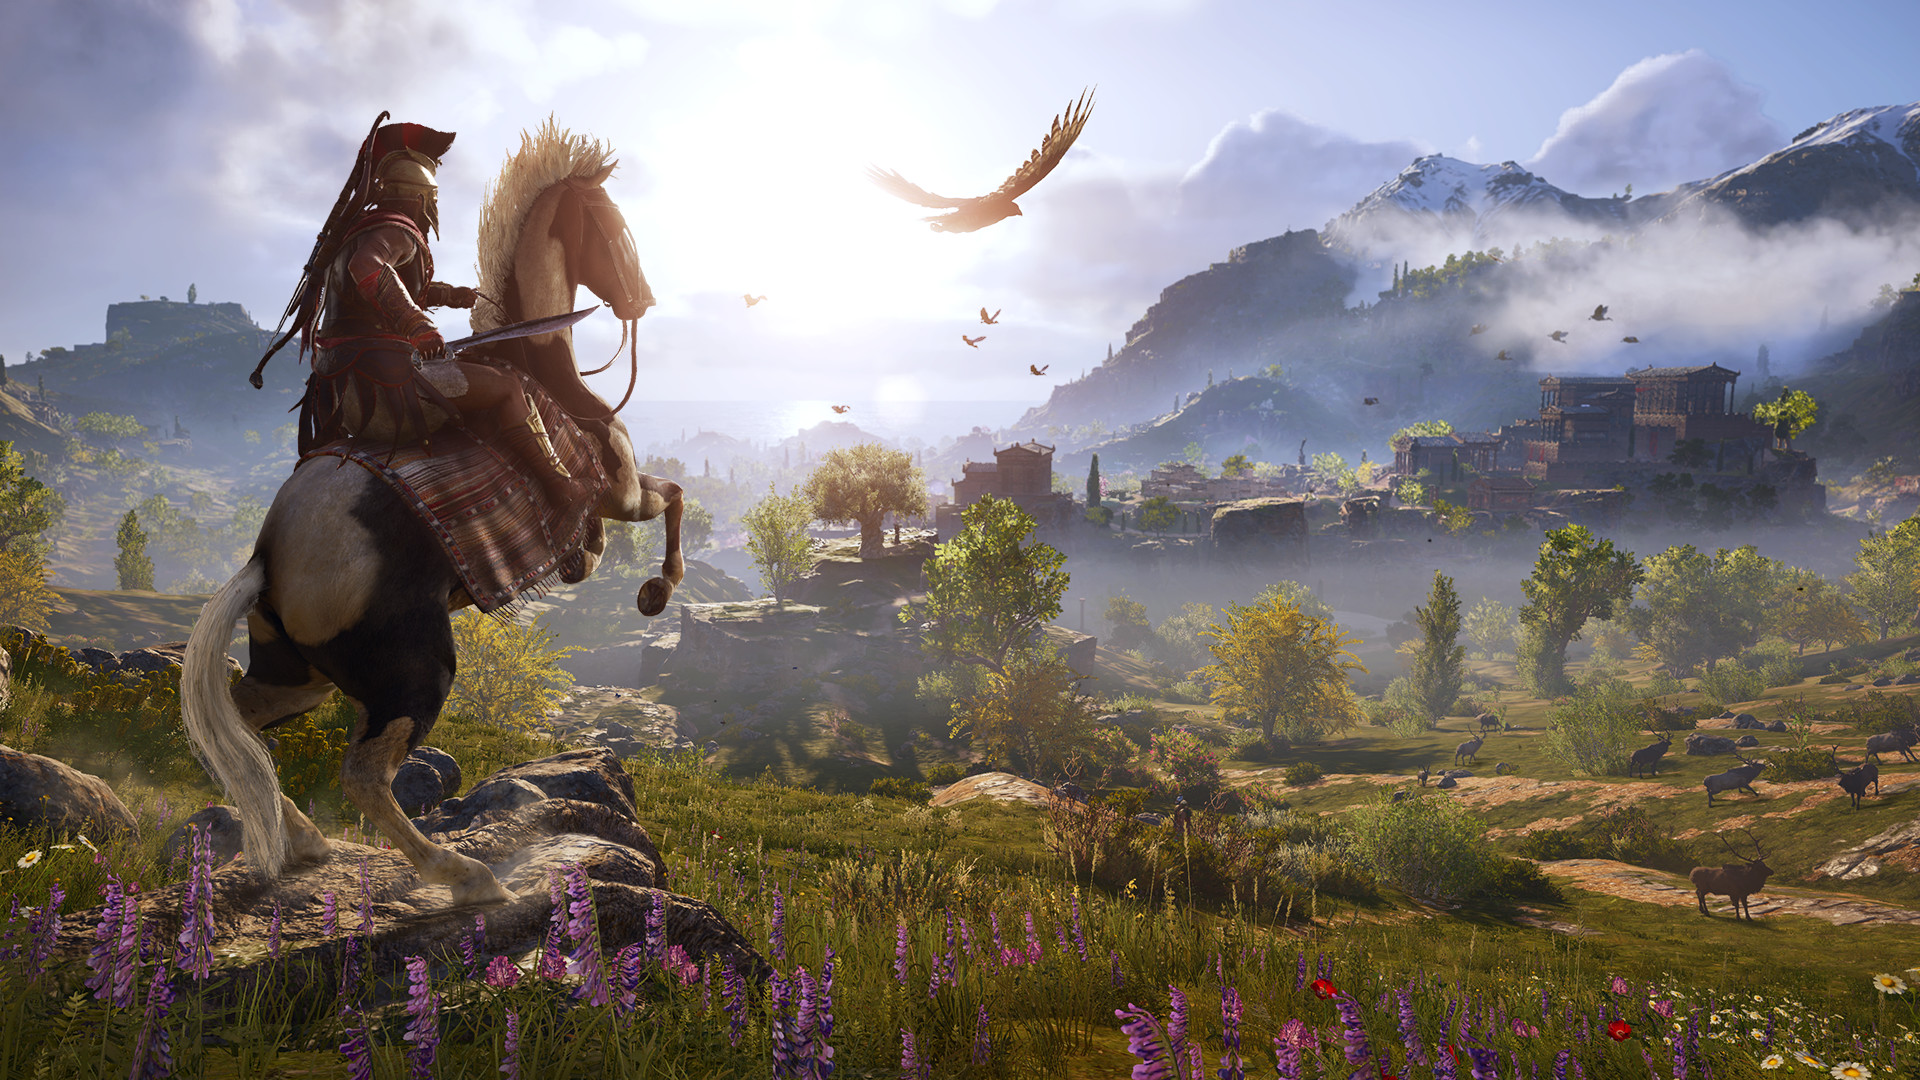 Find the best laptops for Assassin's Creed Odyssey